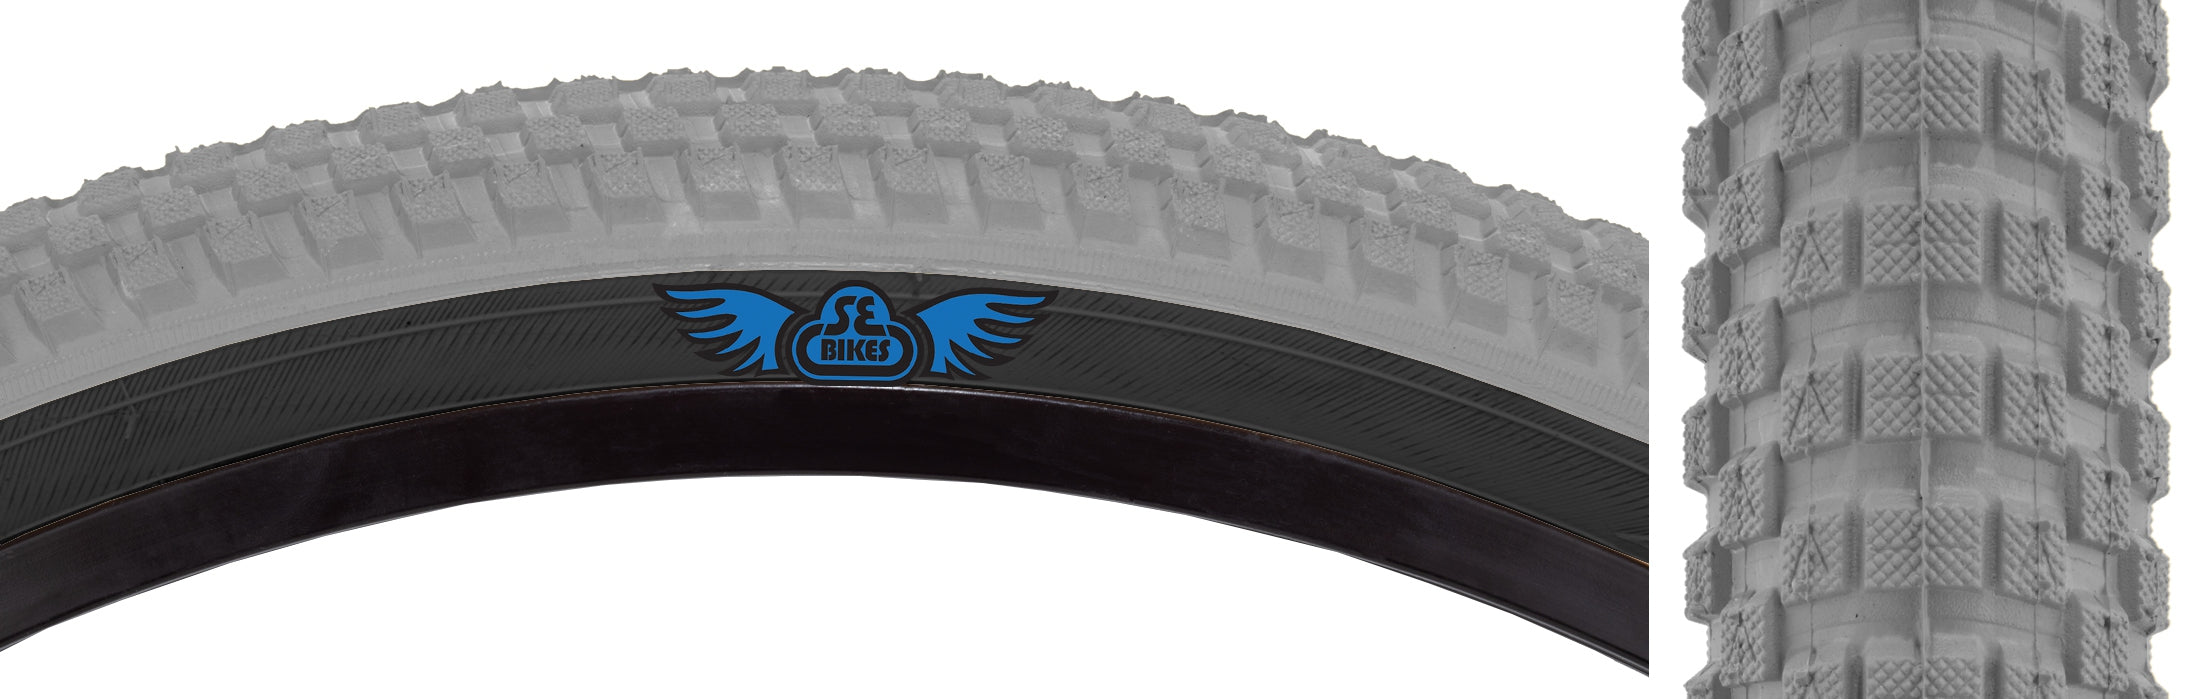 side view of cub tire in grey